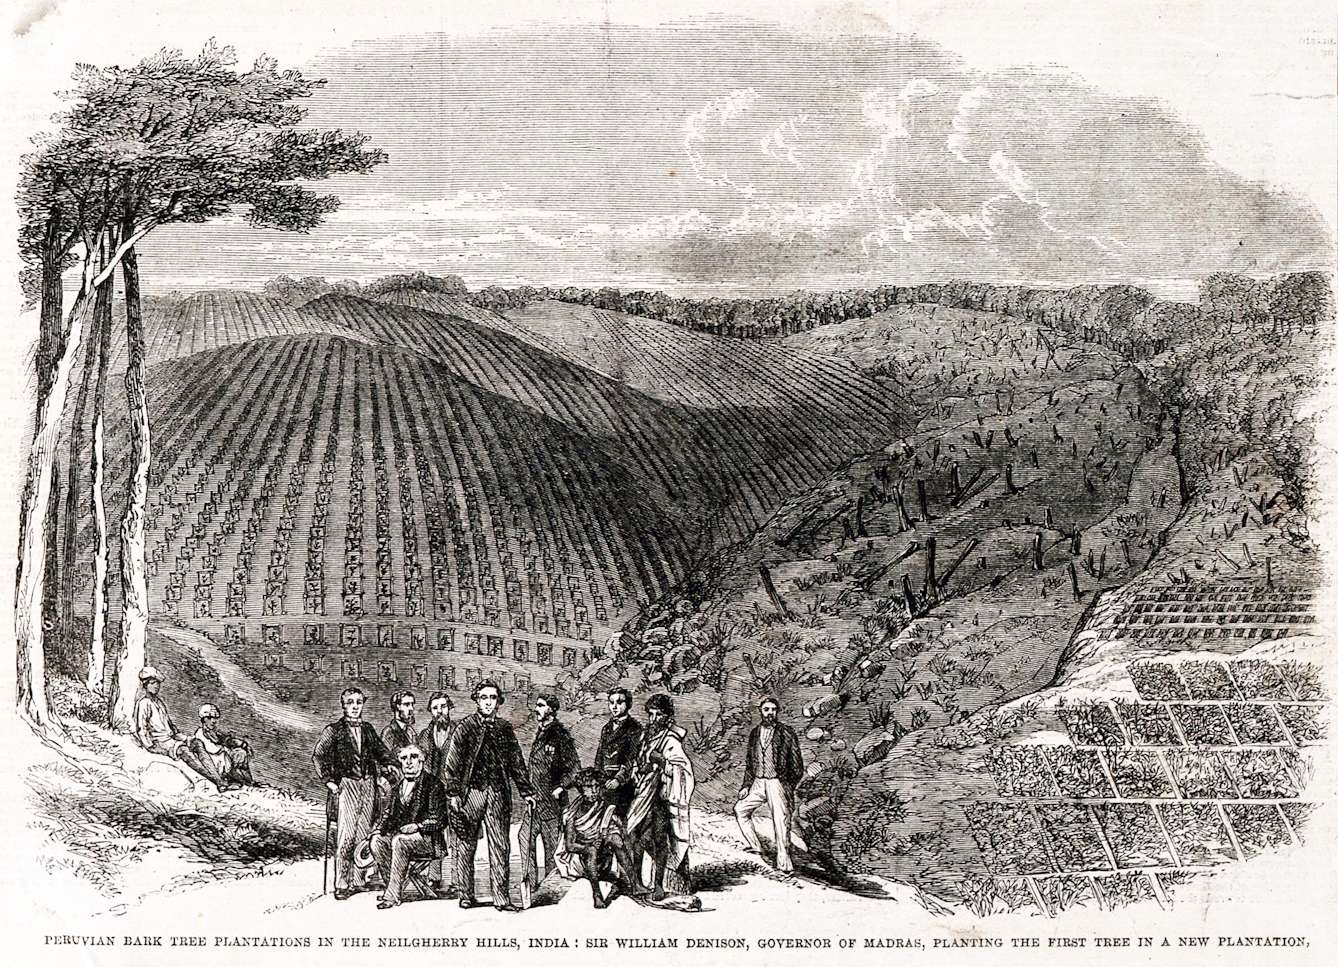 A group of European and Indian men stand and sit infront of a newly cleared area of forest, planted with young cinchona trees in a plantation in the Nilgherry Hills, India. Sir William Denison is identified as one of the group. Woodblock print, 1862.